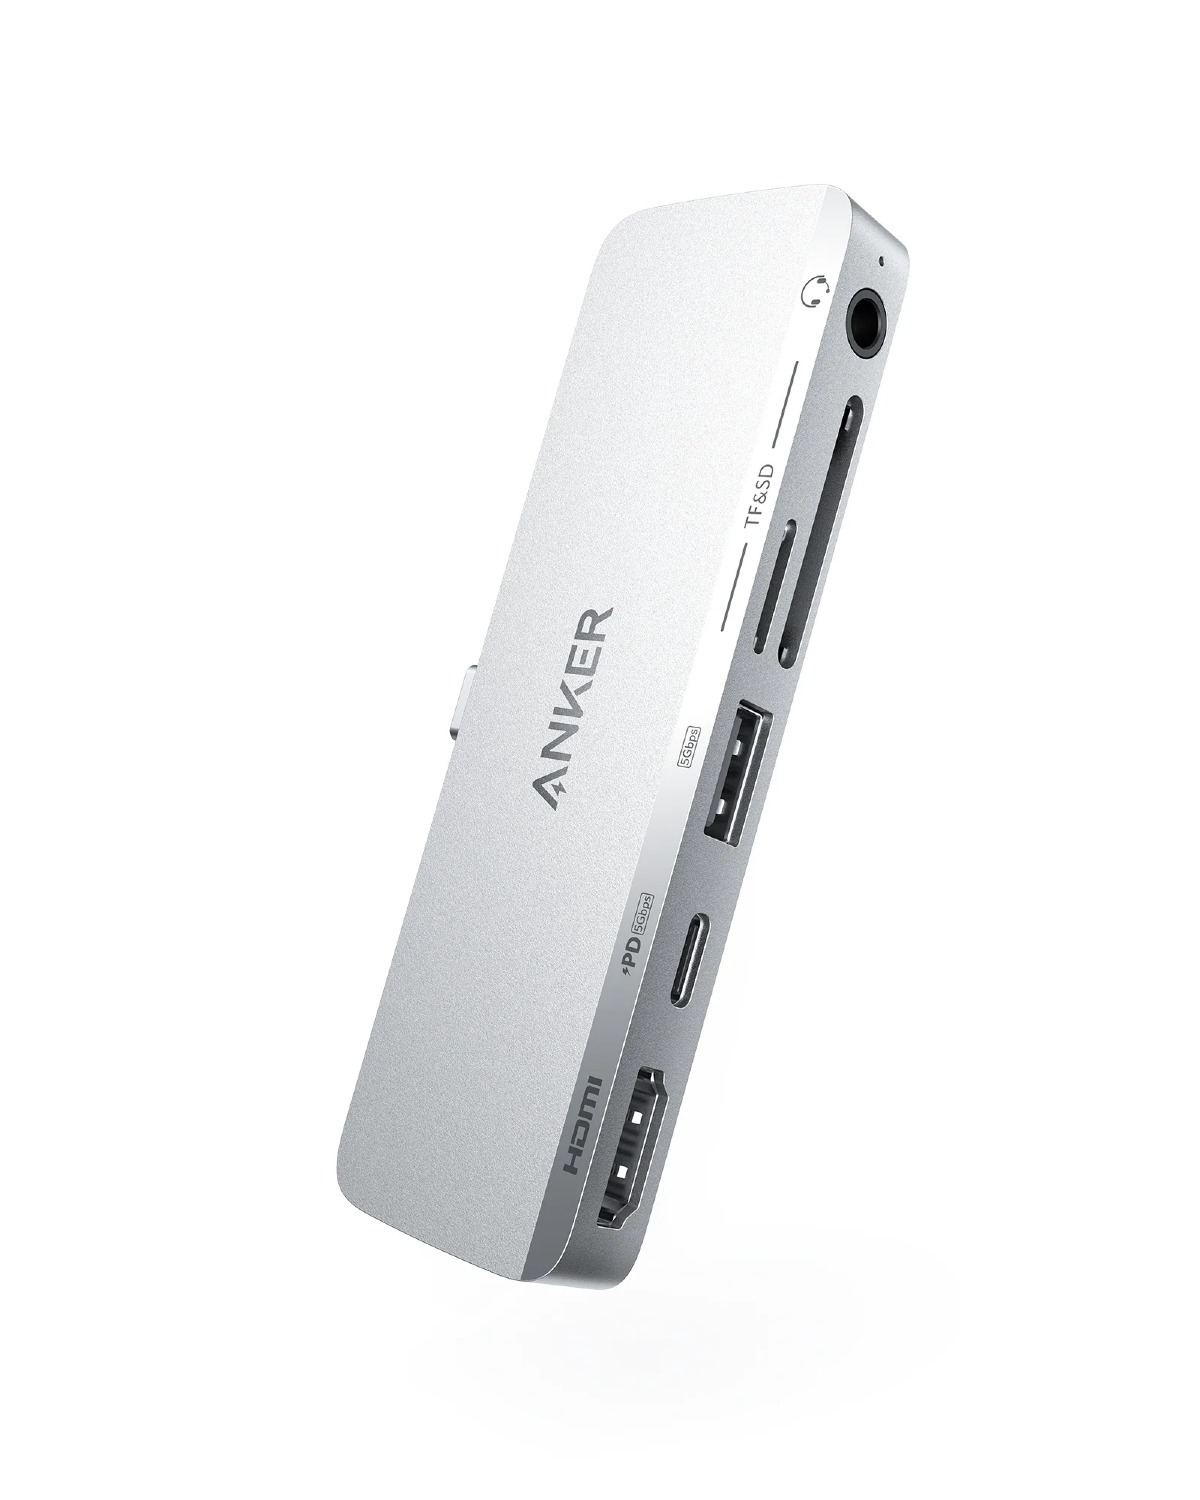 Anker 541 6-in-1 USB-C Hub for iPads: 60W PD, 4K@60Hz HDMI, USB-C, USB-A 3.0, SD/Micro-SD, 3.5mm Audio Jack (Silver) $23 + Free Shipping